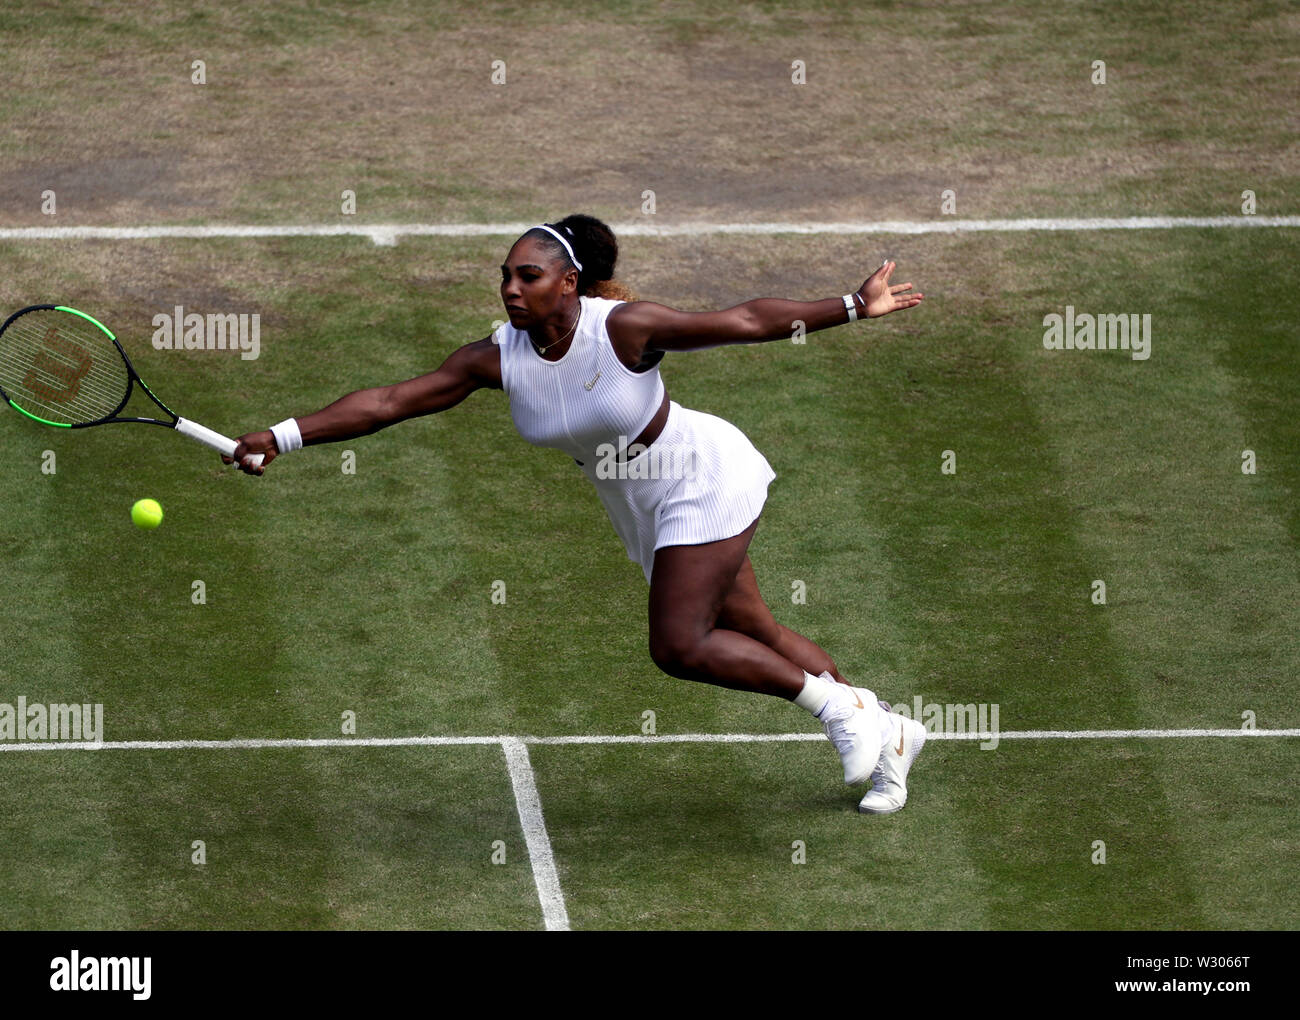 Wimbledon, UK. 11th July, 2019. Serena Williams during her victory over Barbora Strycova in the women's semifinals at Wimbledon today. Credit: Adam Stoltman/Alamy Live News Stock Photo